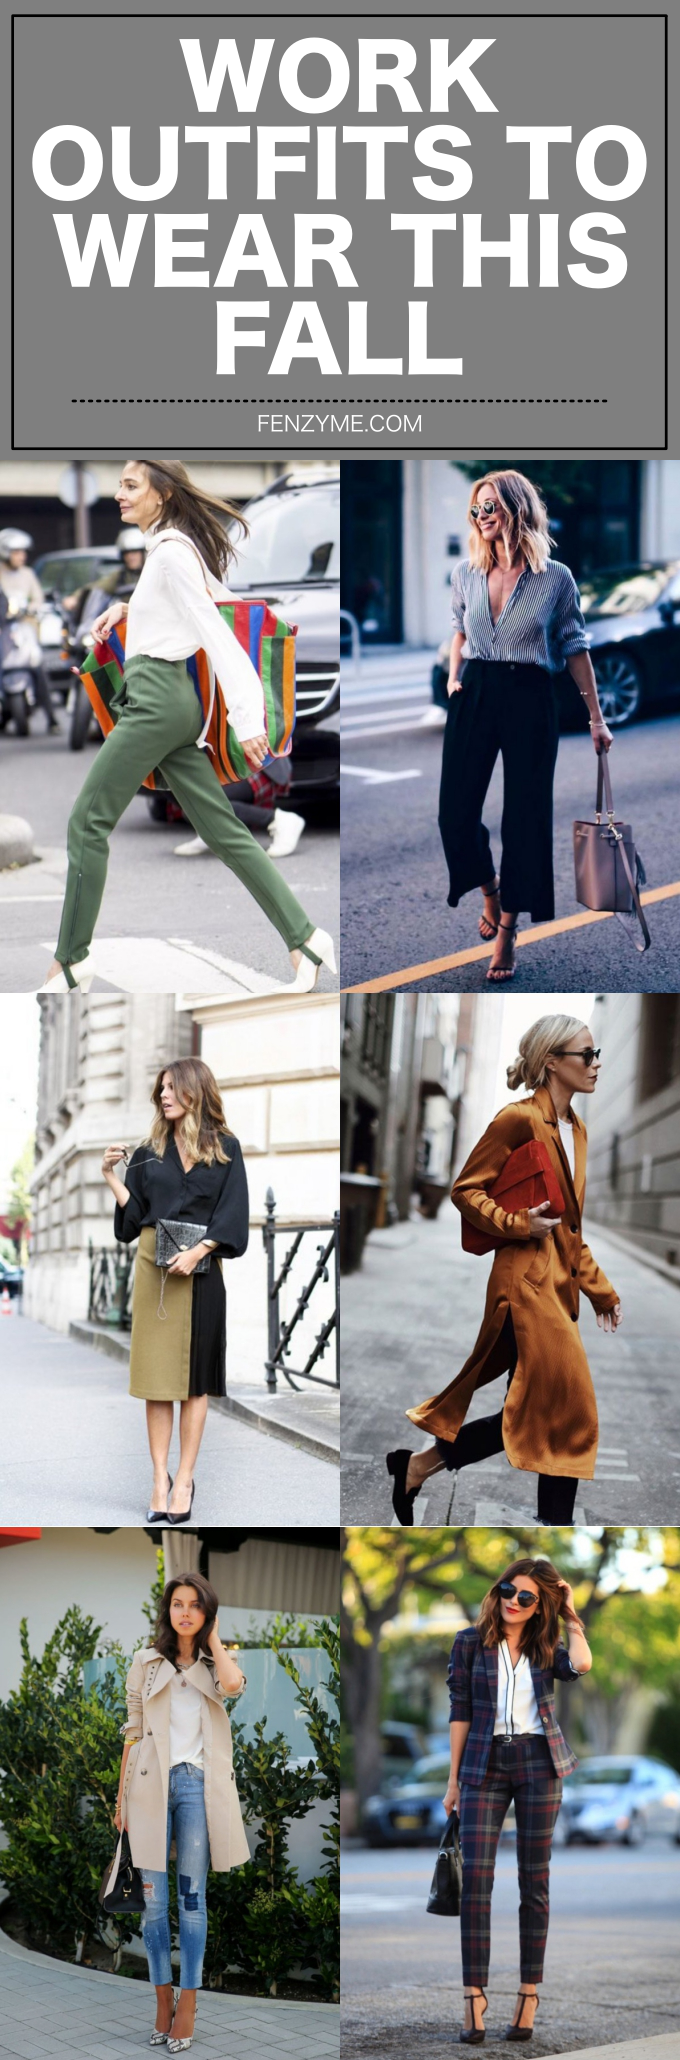 Work Outfits to Wear this Fall